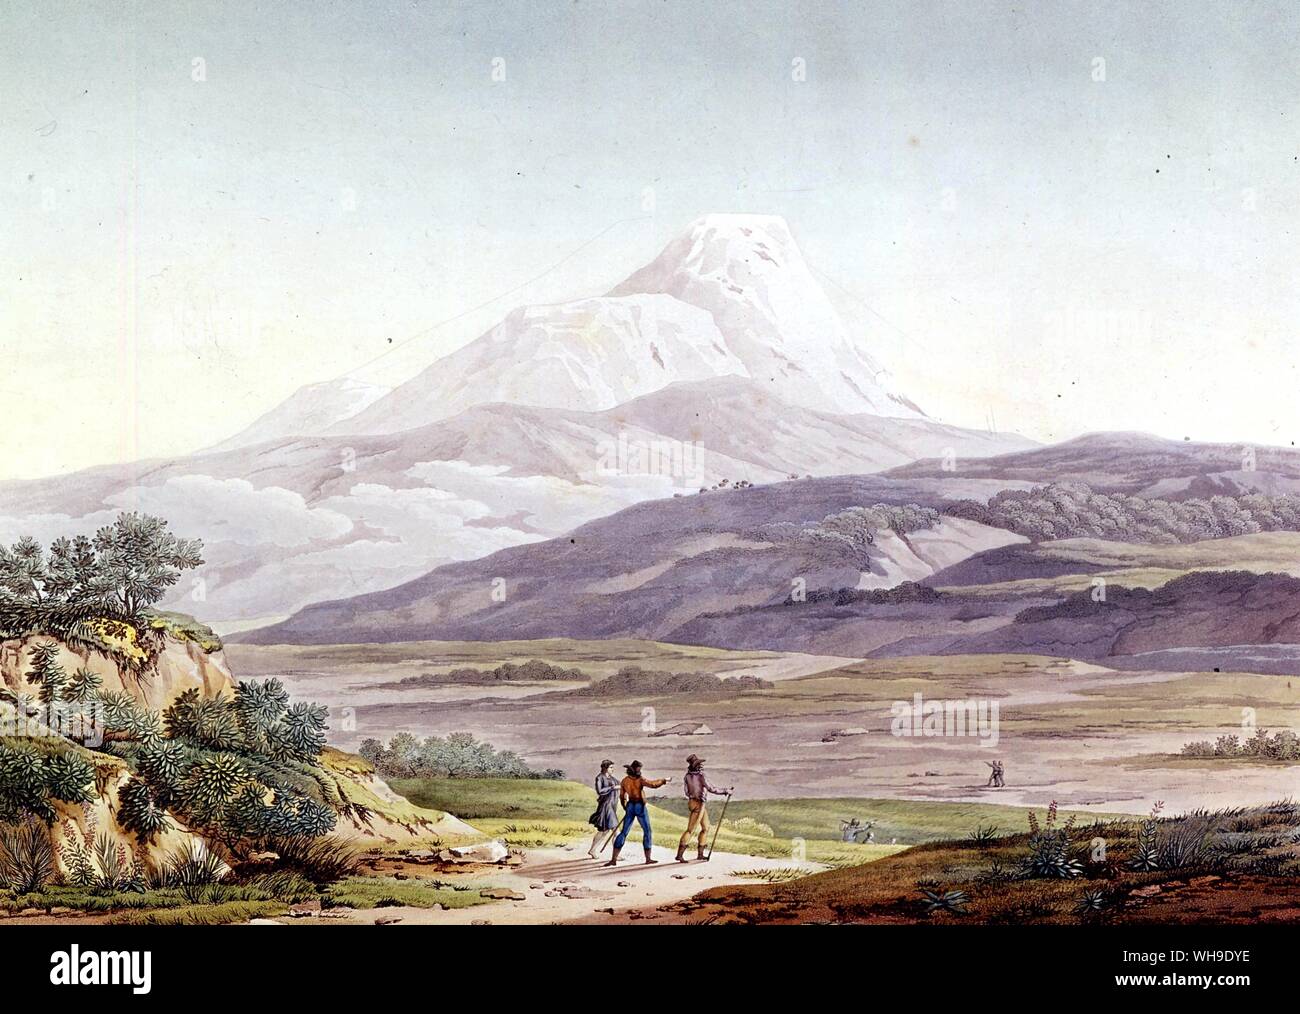 View of Cayambe, Mexico. One of several pictures Humboldt commissioned from his brother's friends in Rome in the summer of 1805, to illustrate his Vues des Cordilleres Stock Photo